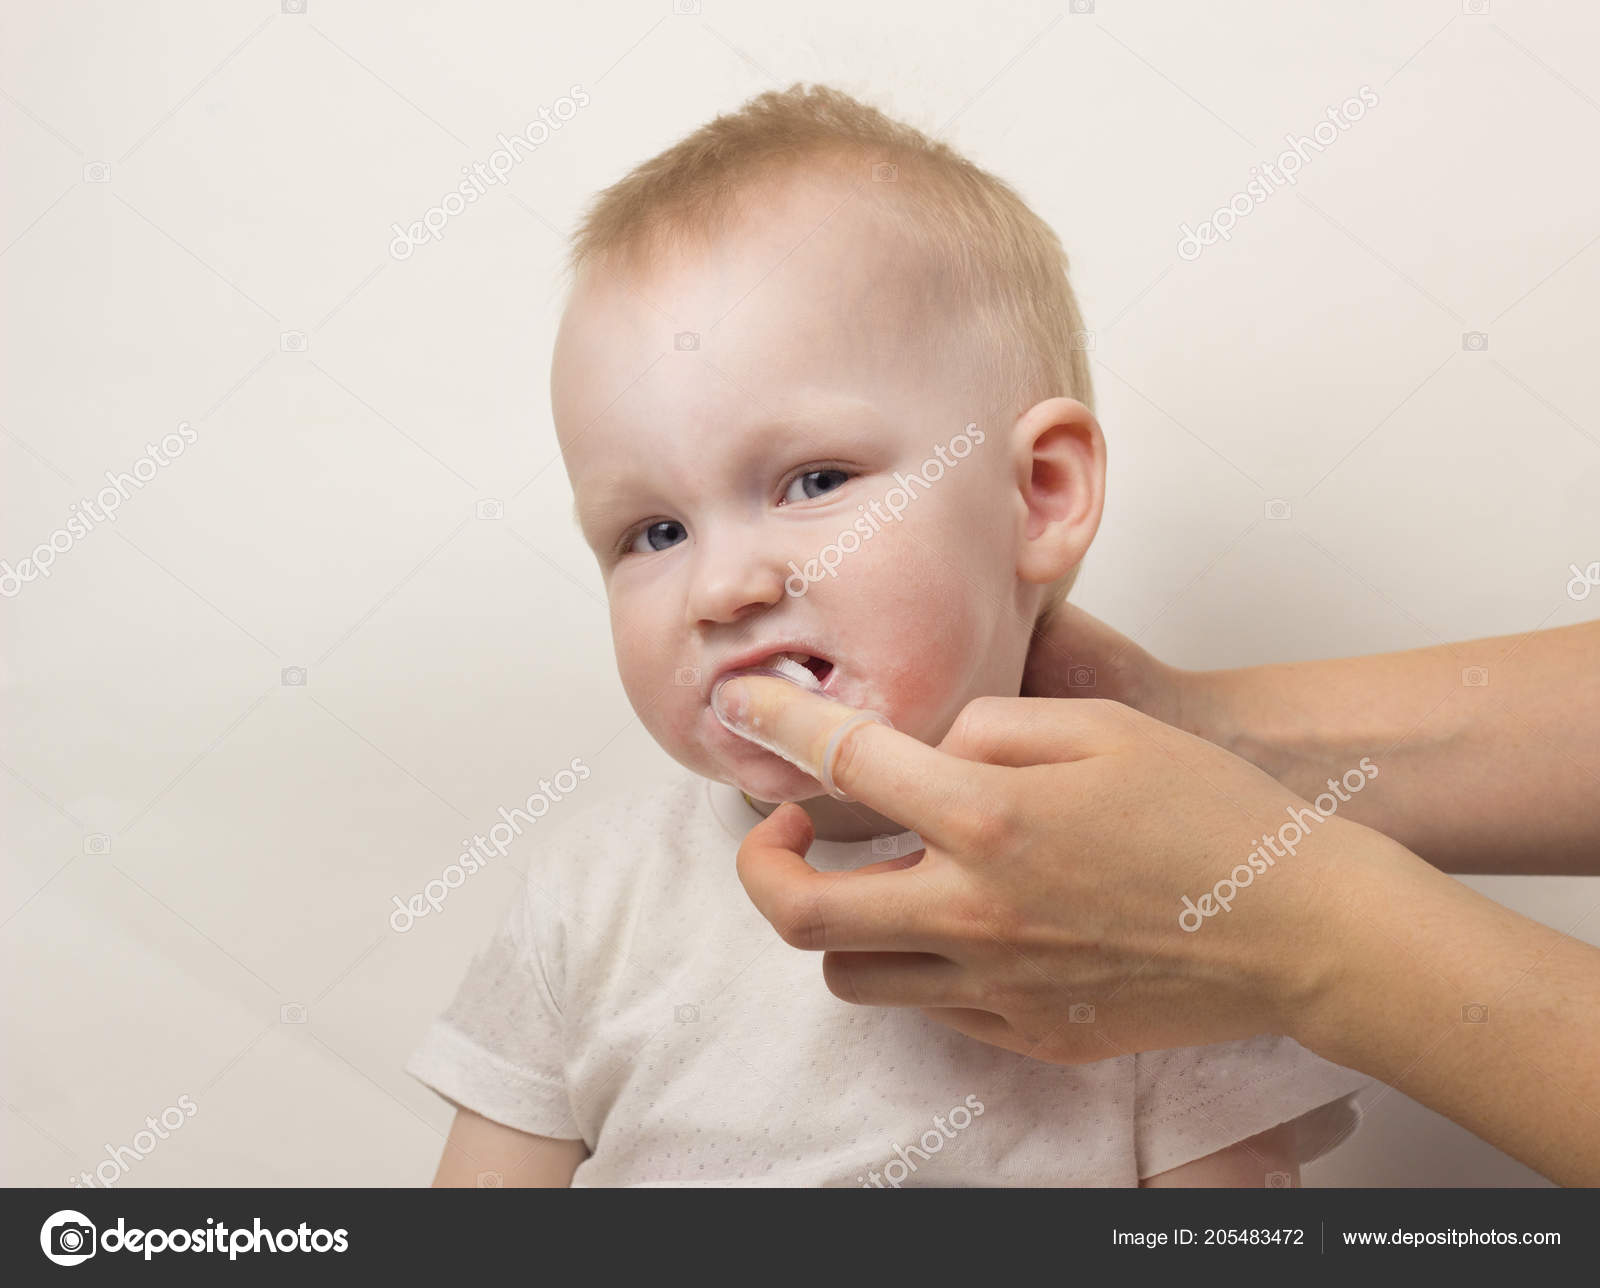 Bad baby Stock Photos, Royalty Free Bad baby Images | Depositphotos